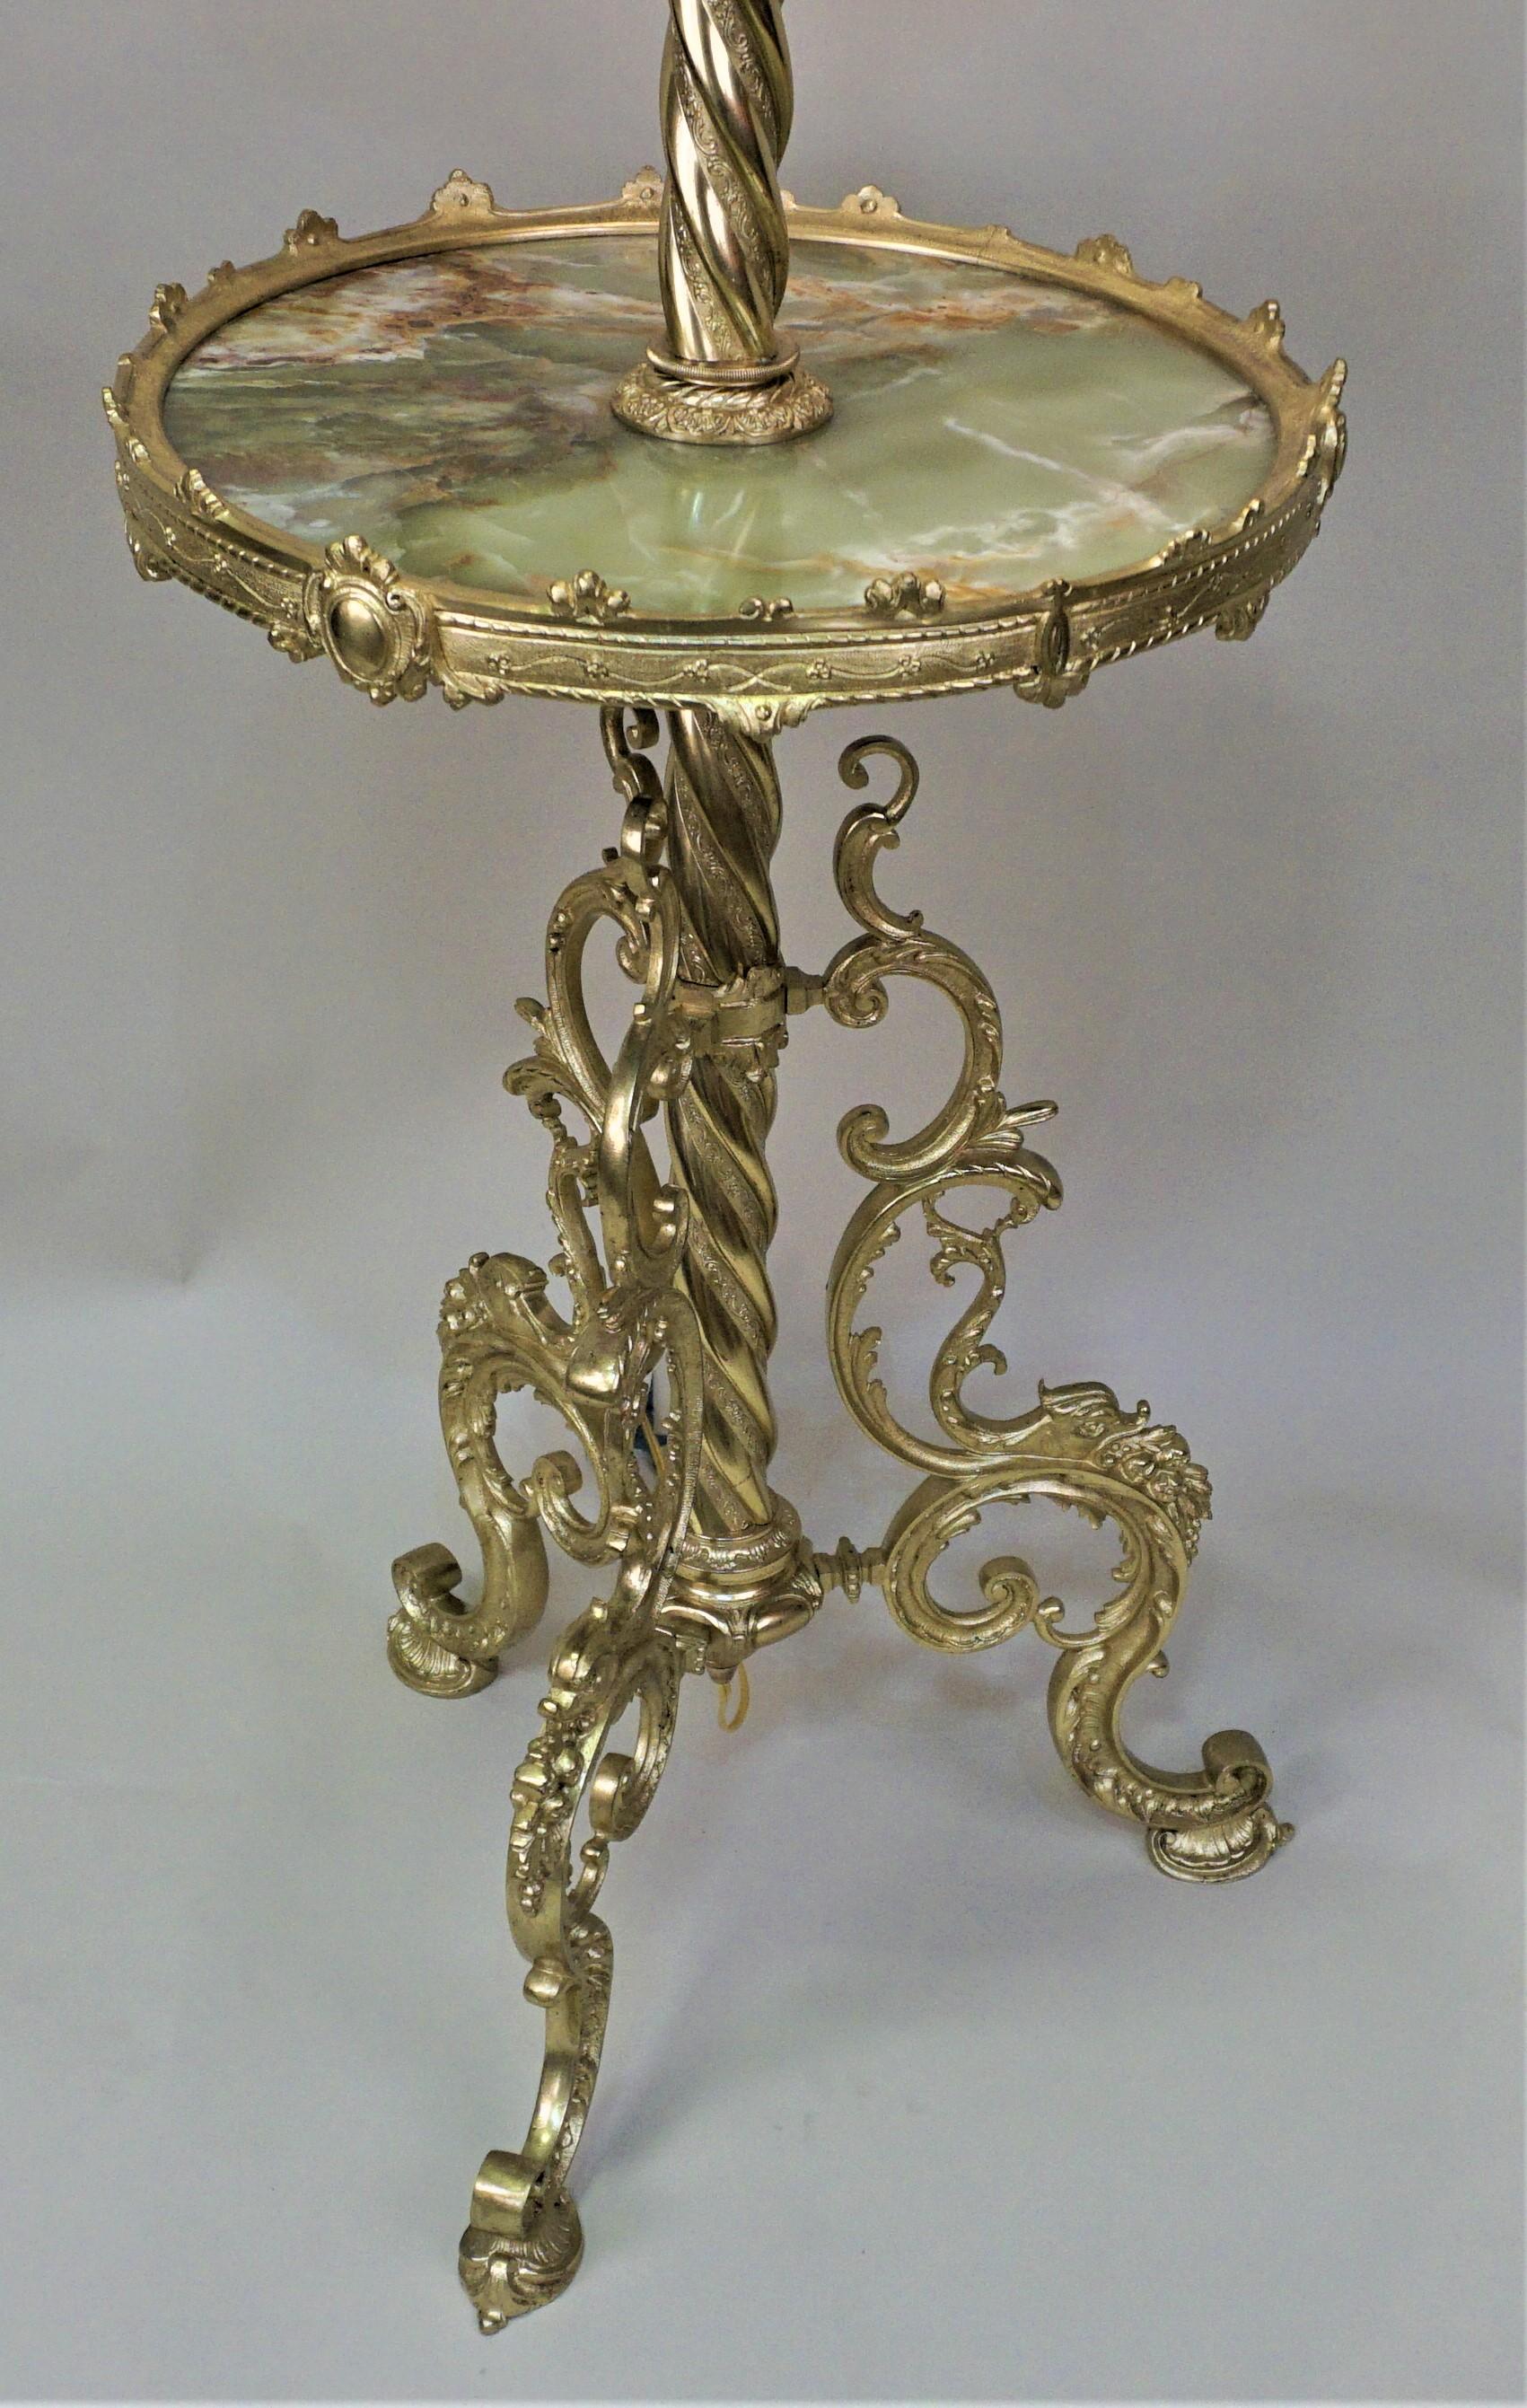 Elegant electrified 19th century bronze oil floor lamp with green onyx table.
Fitter with hand pleat silk lampshade.